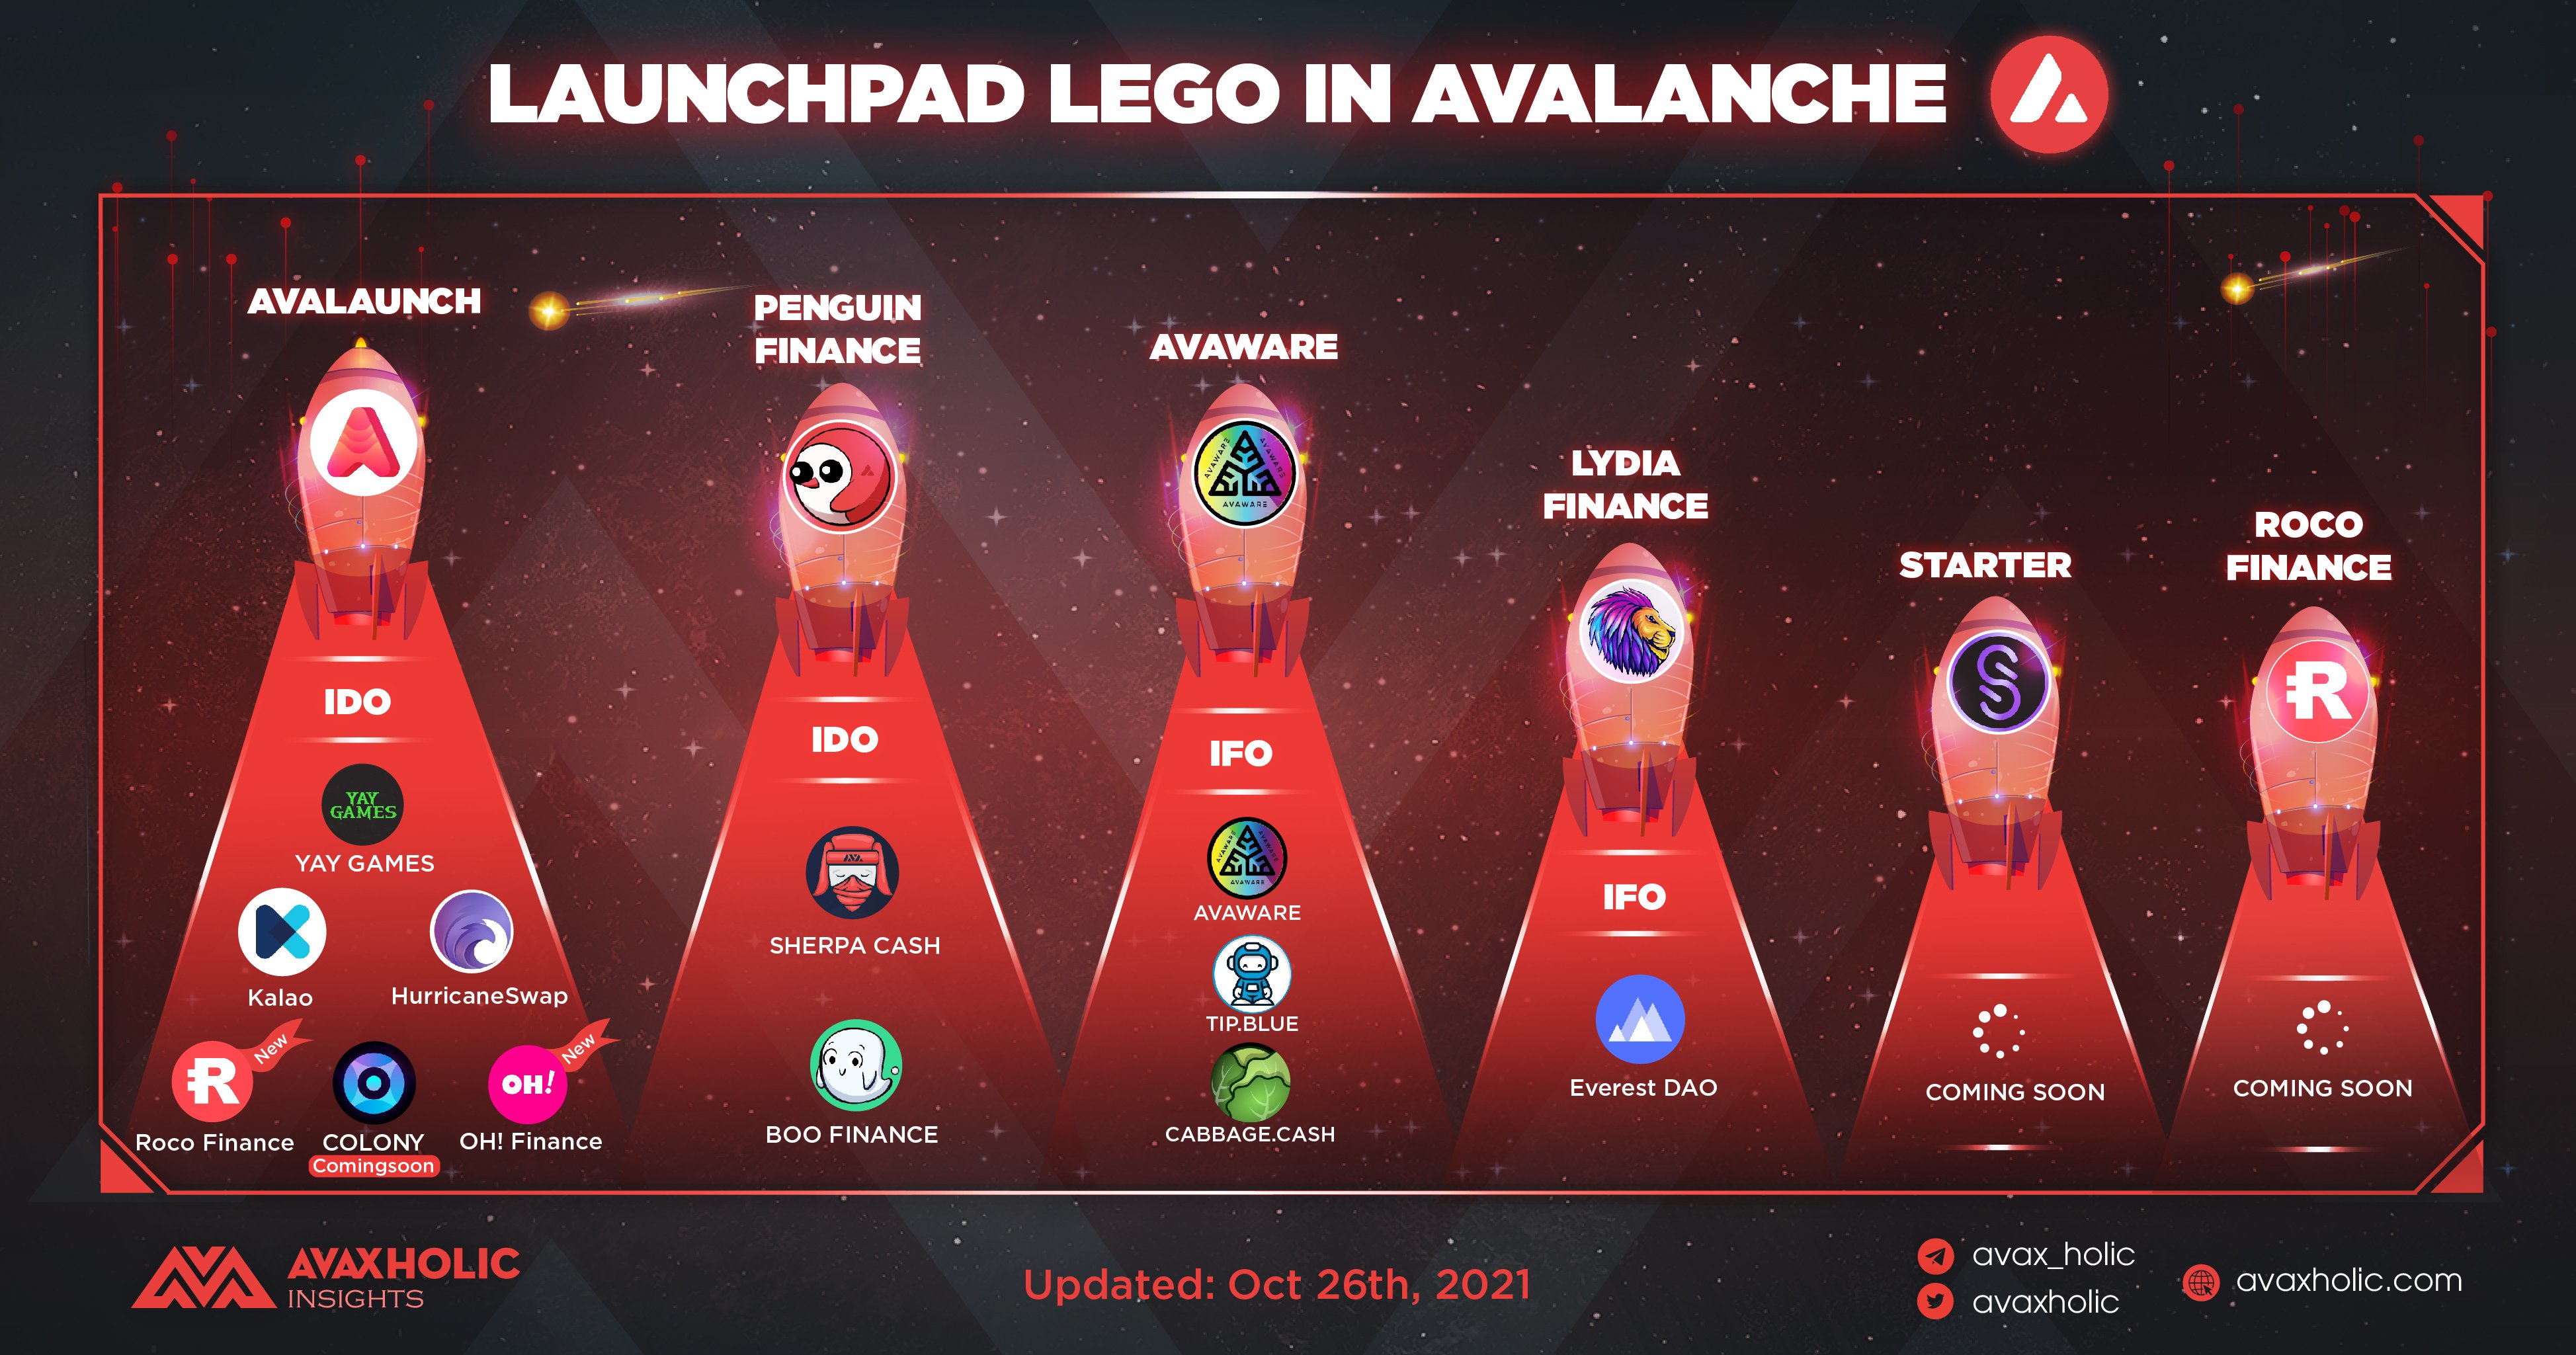 LAUNCHPAD LEGO IN AVALANCHE